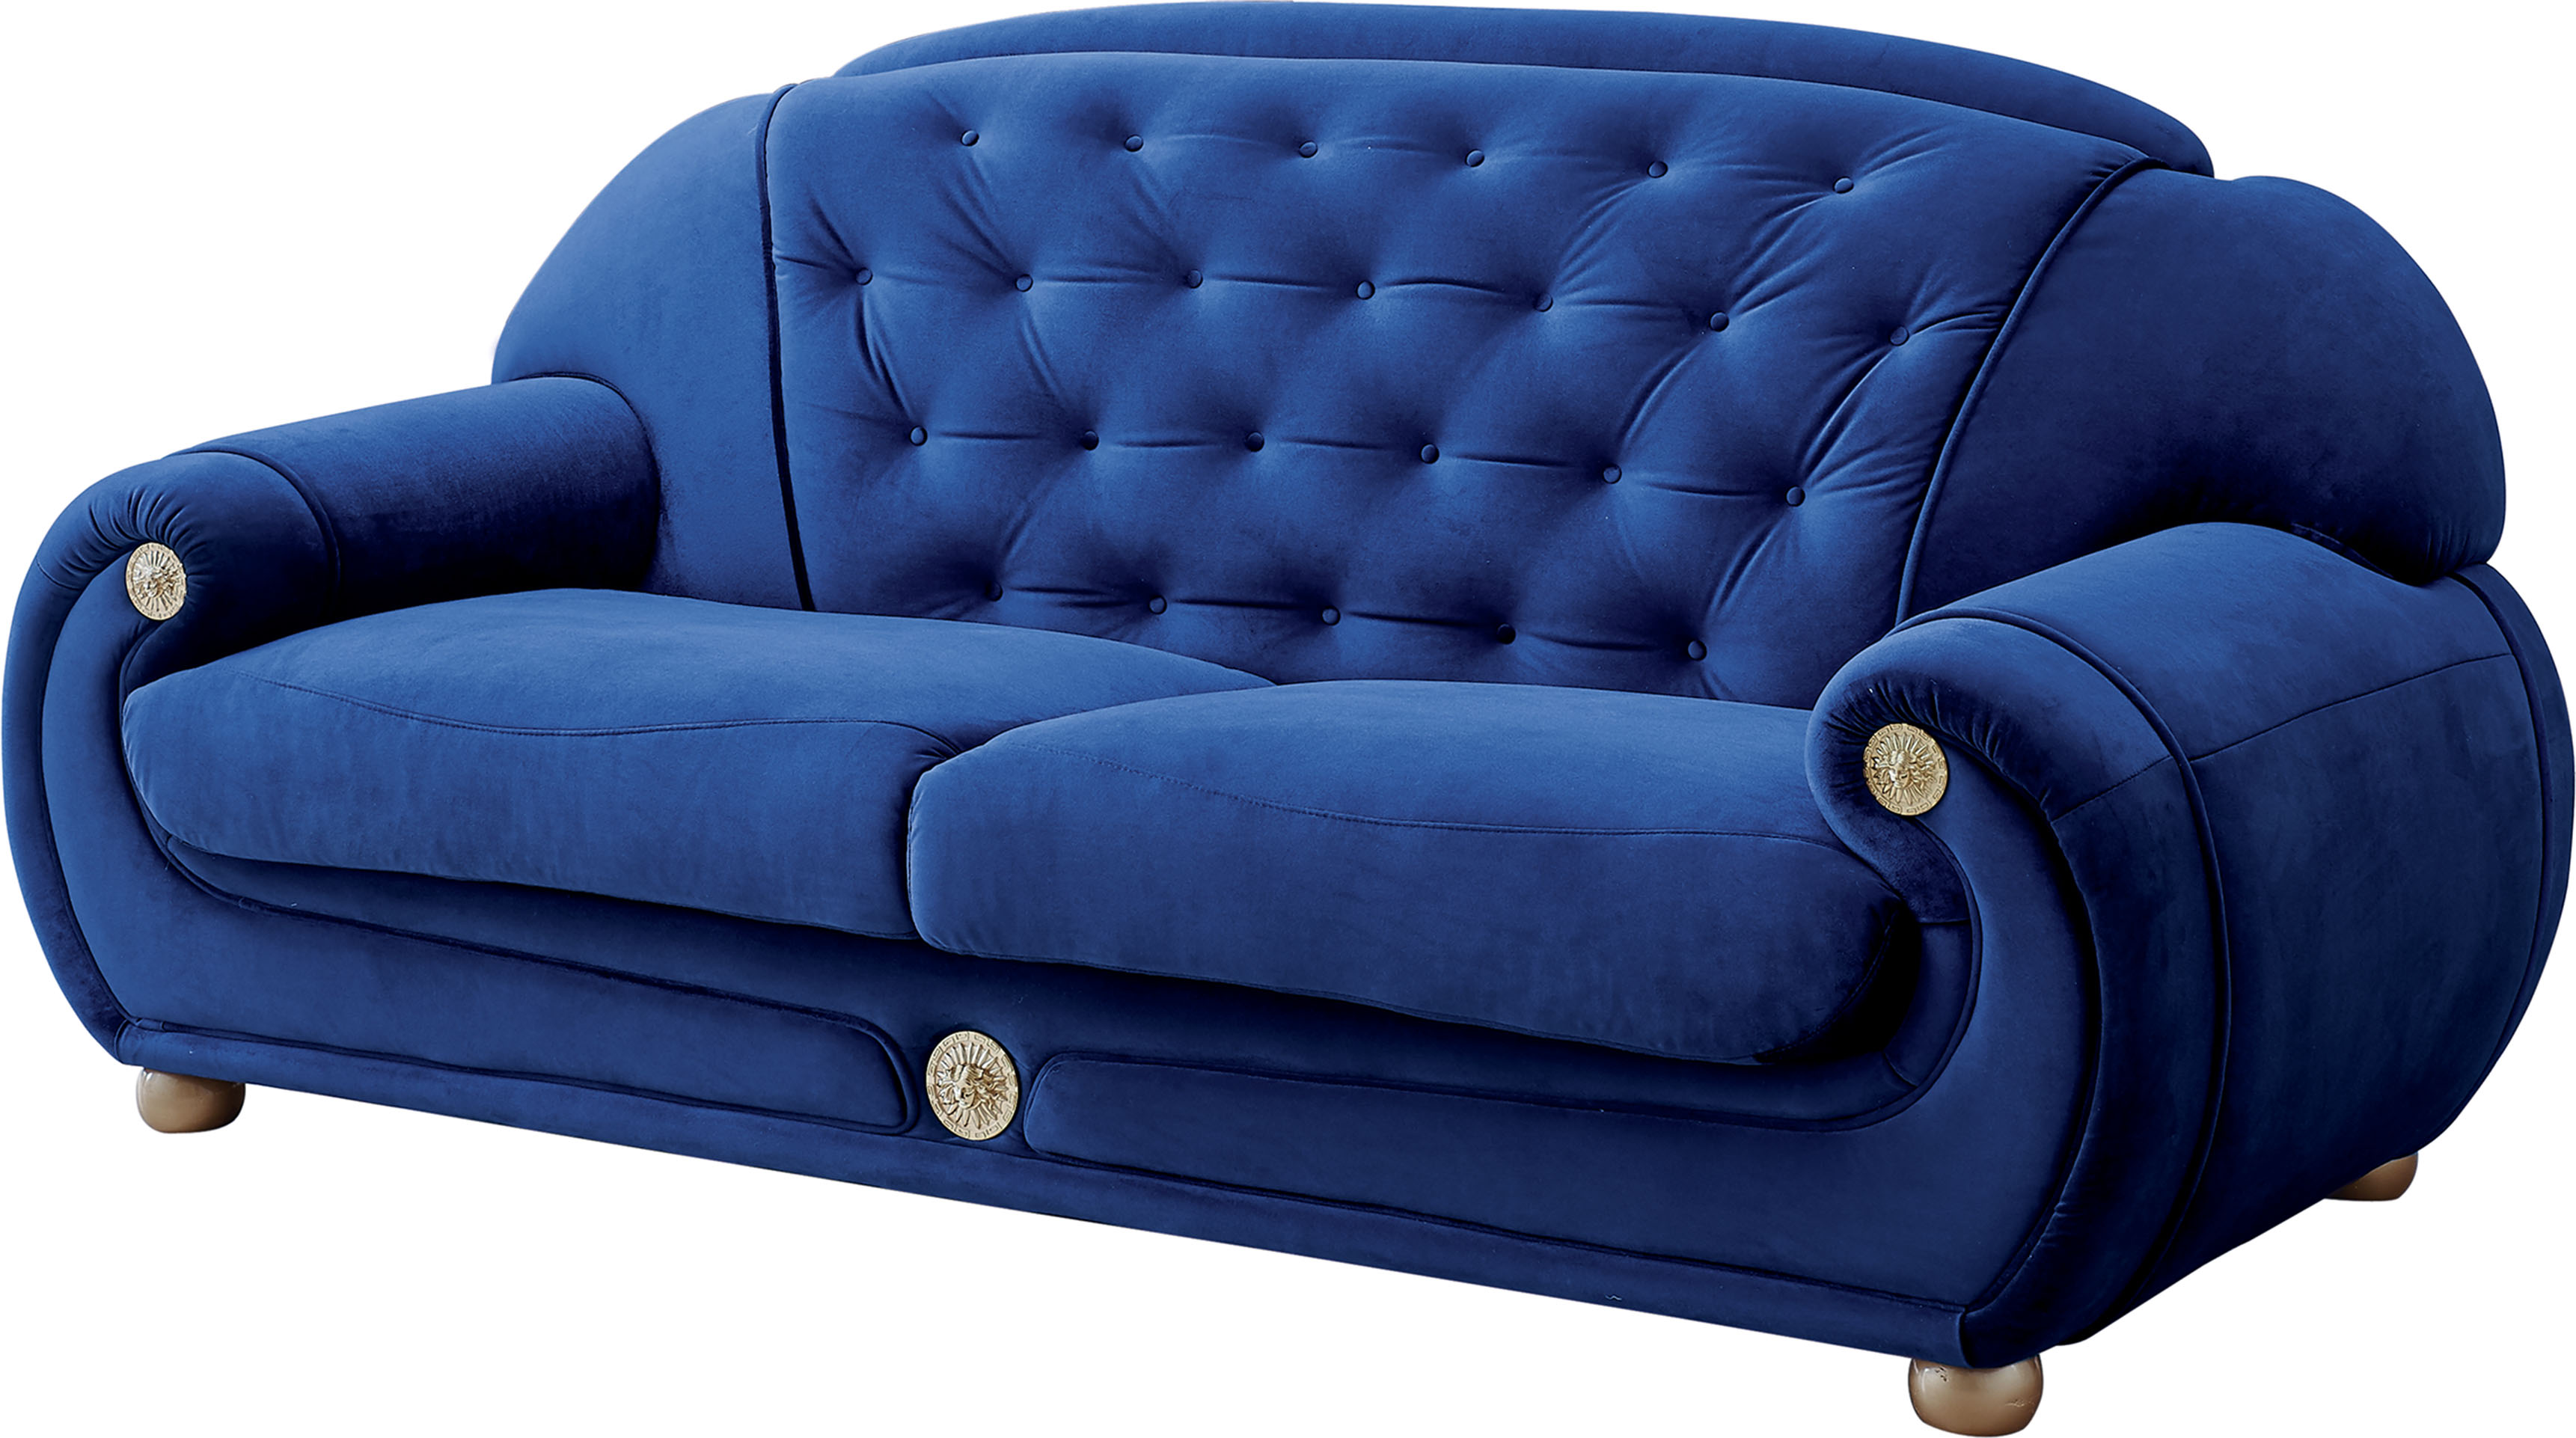 blue sofa bed couch